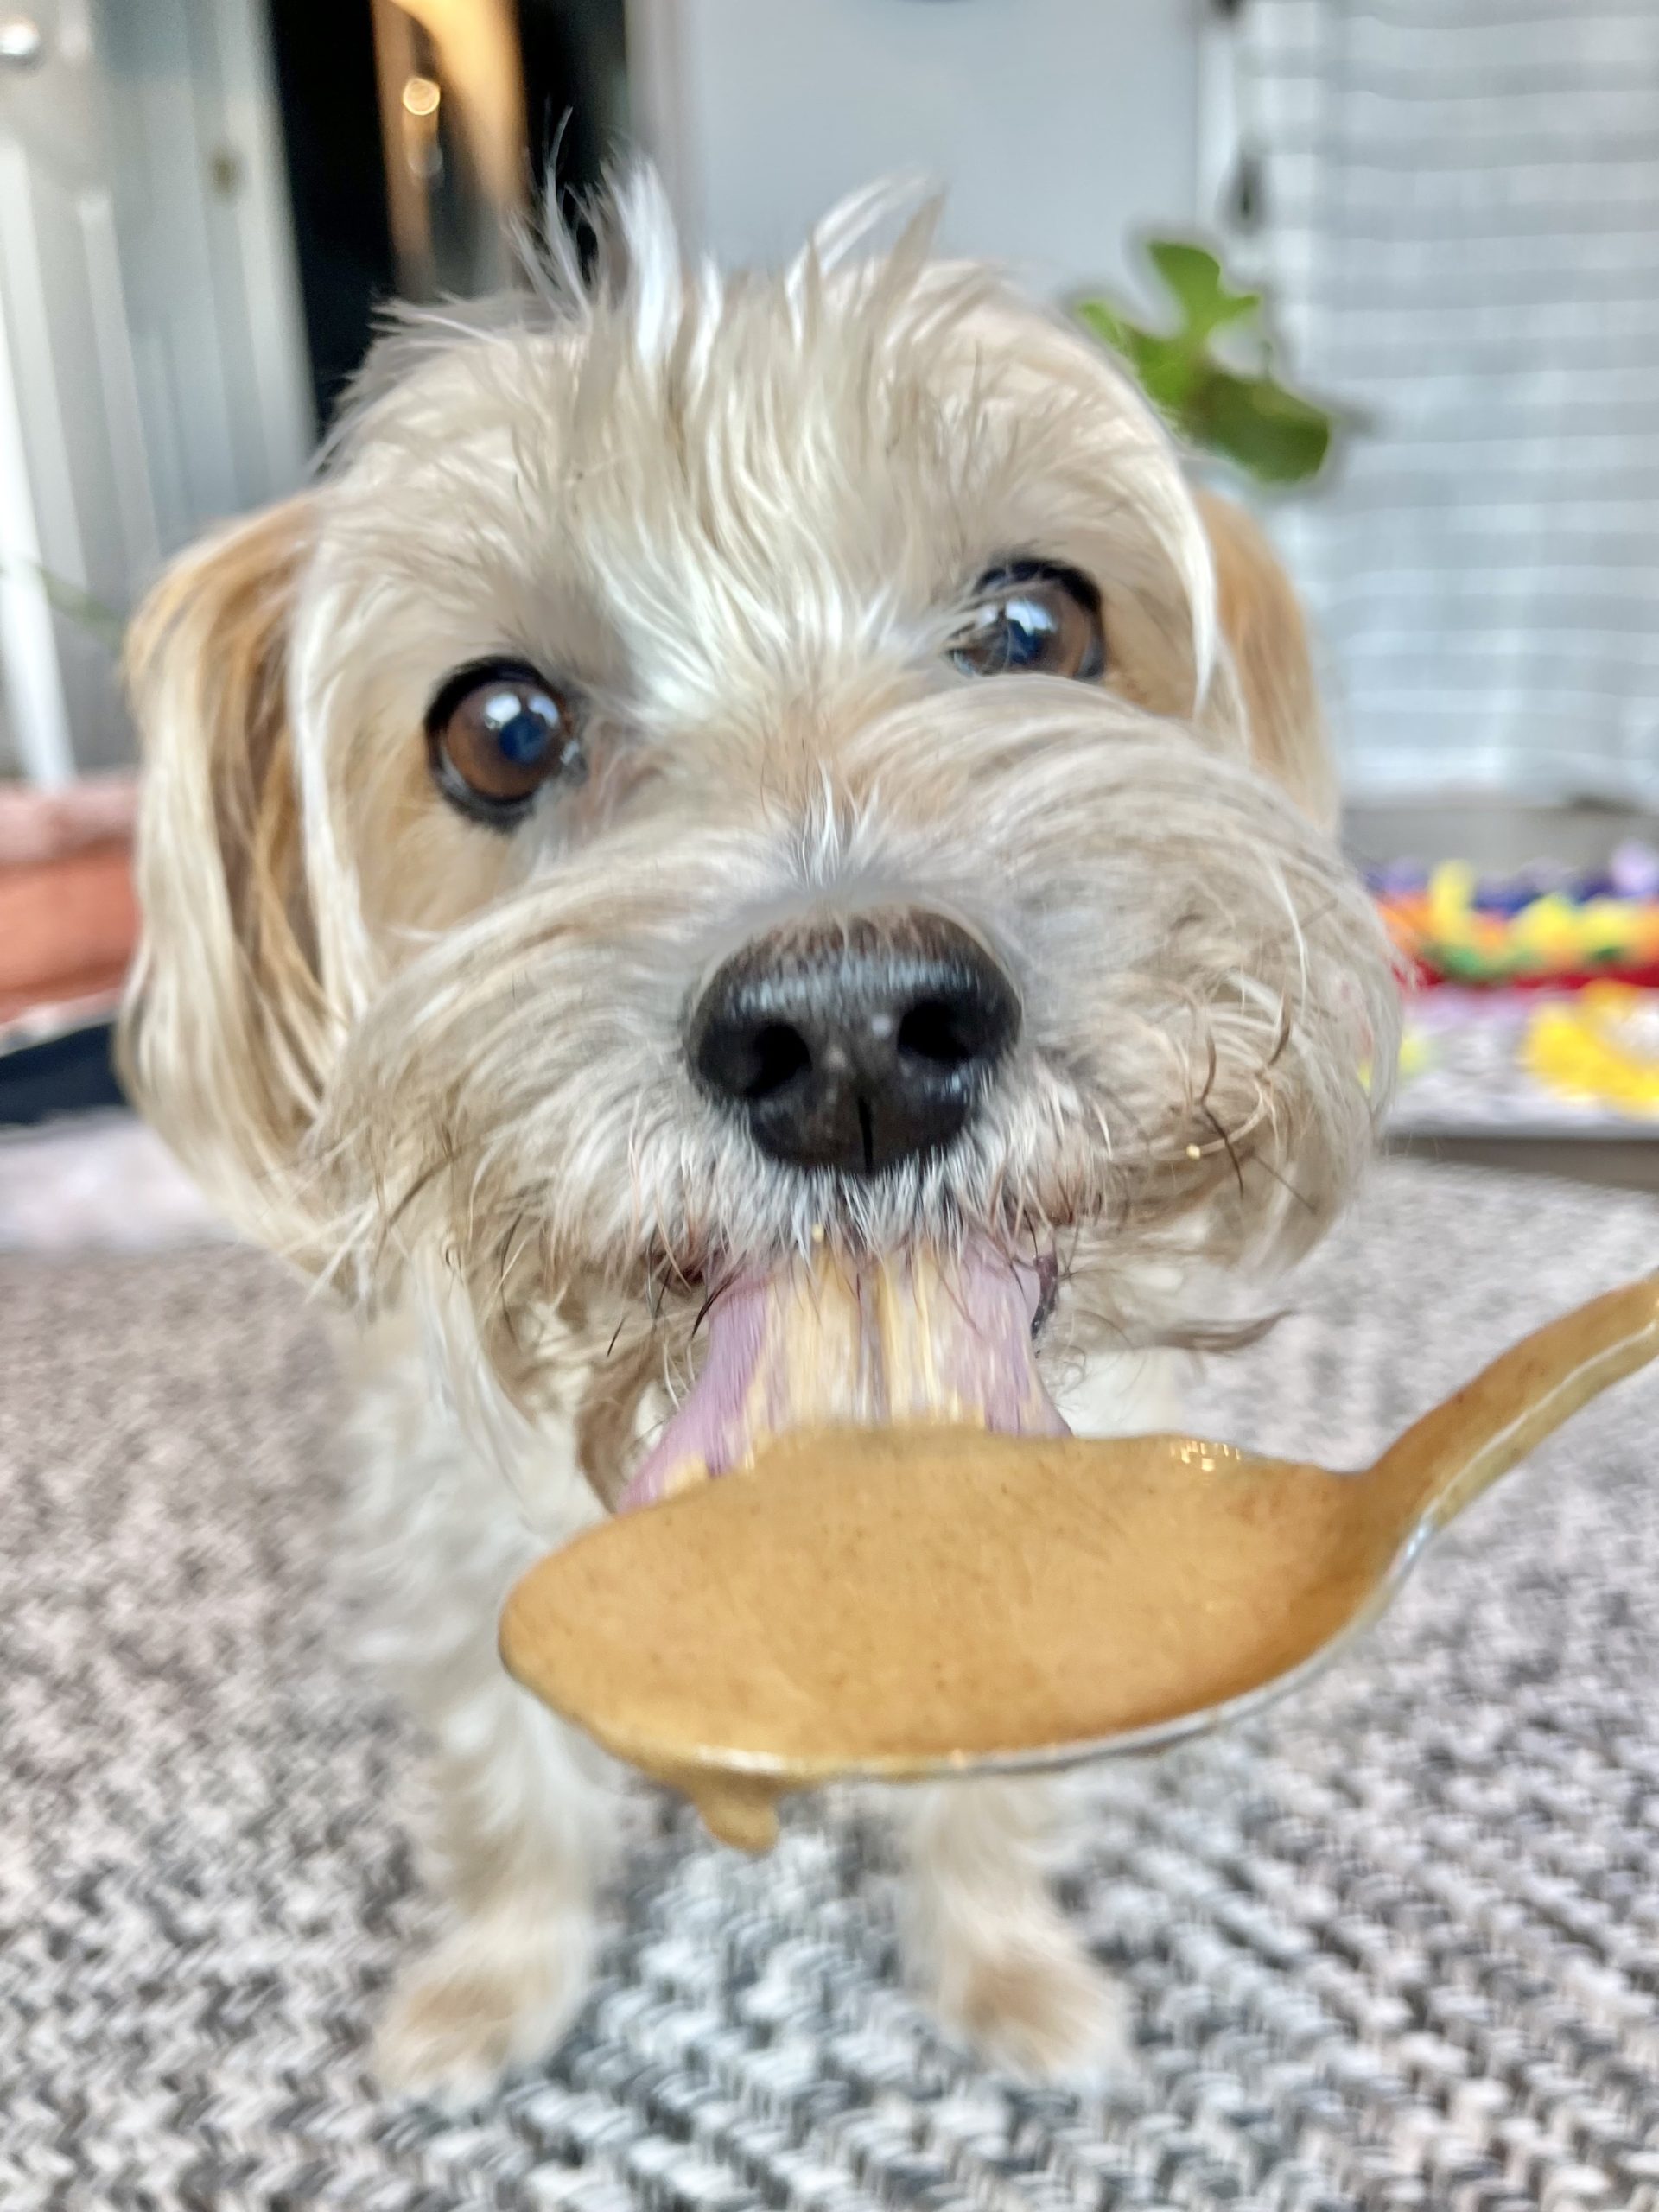 Teddy, a small tan dog is licking a spoon of peanut butter. his tongue is sticking out with peanut butter on it.